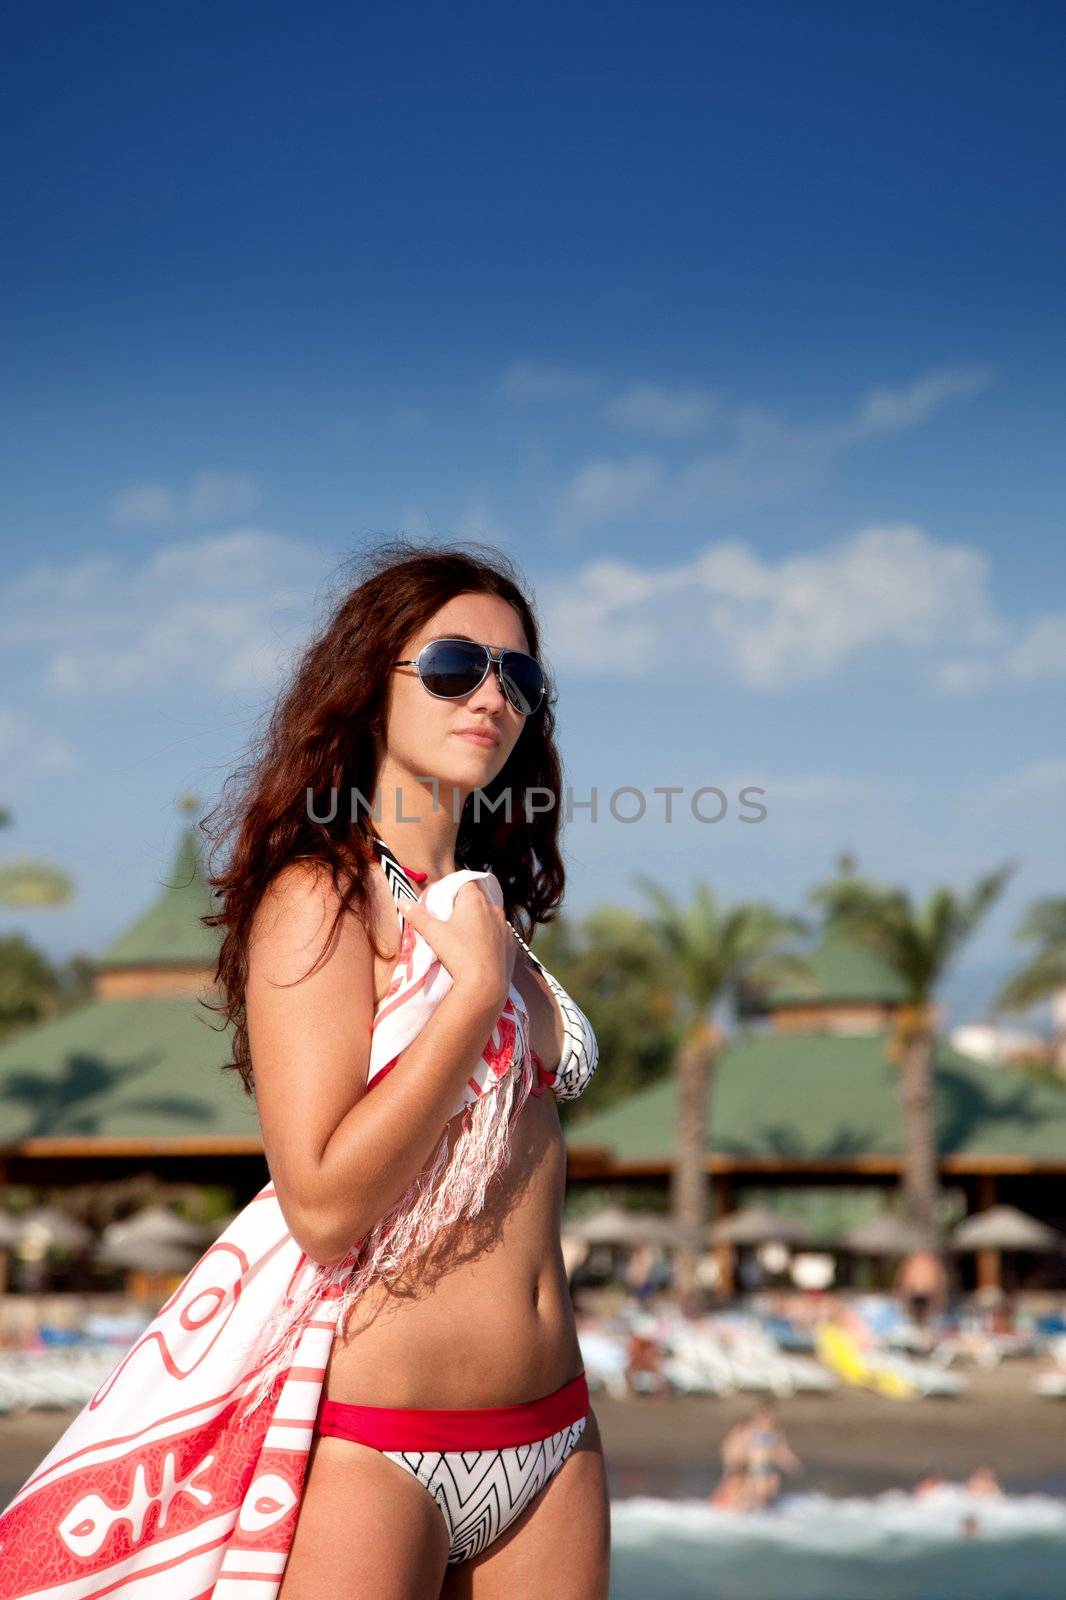 Pretty girl on the seashore by Vof